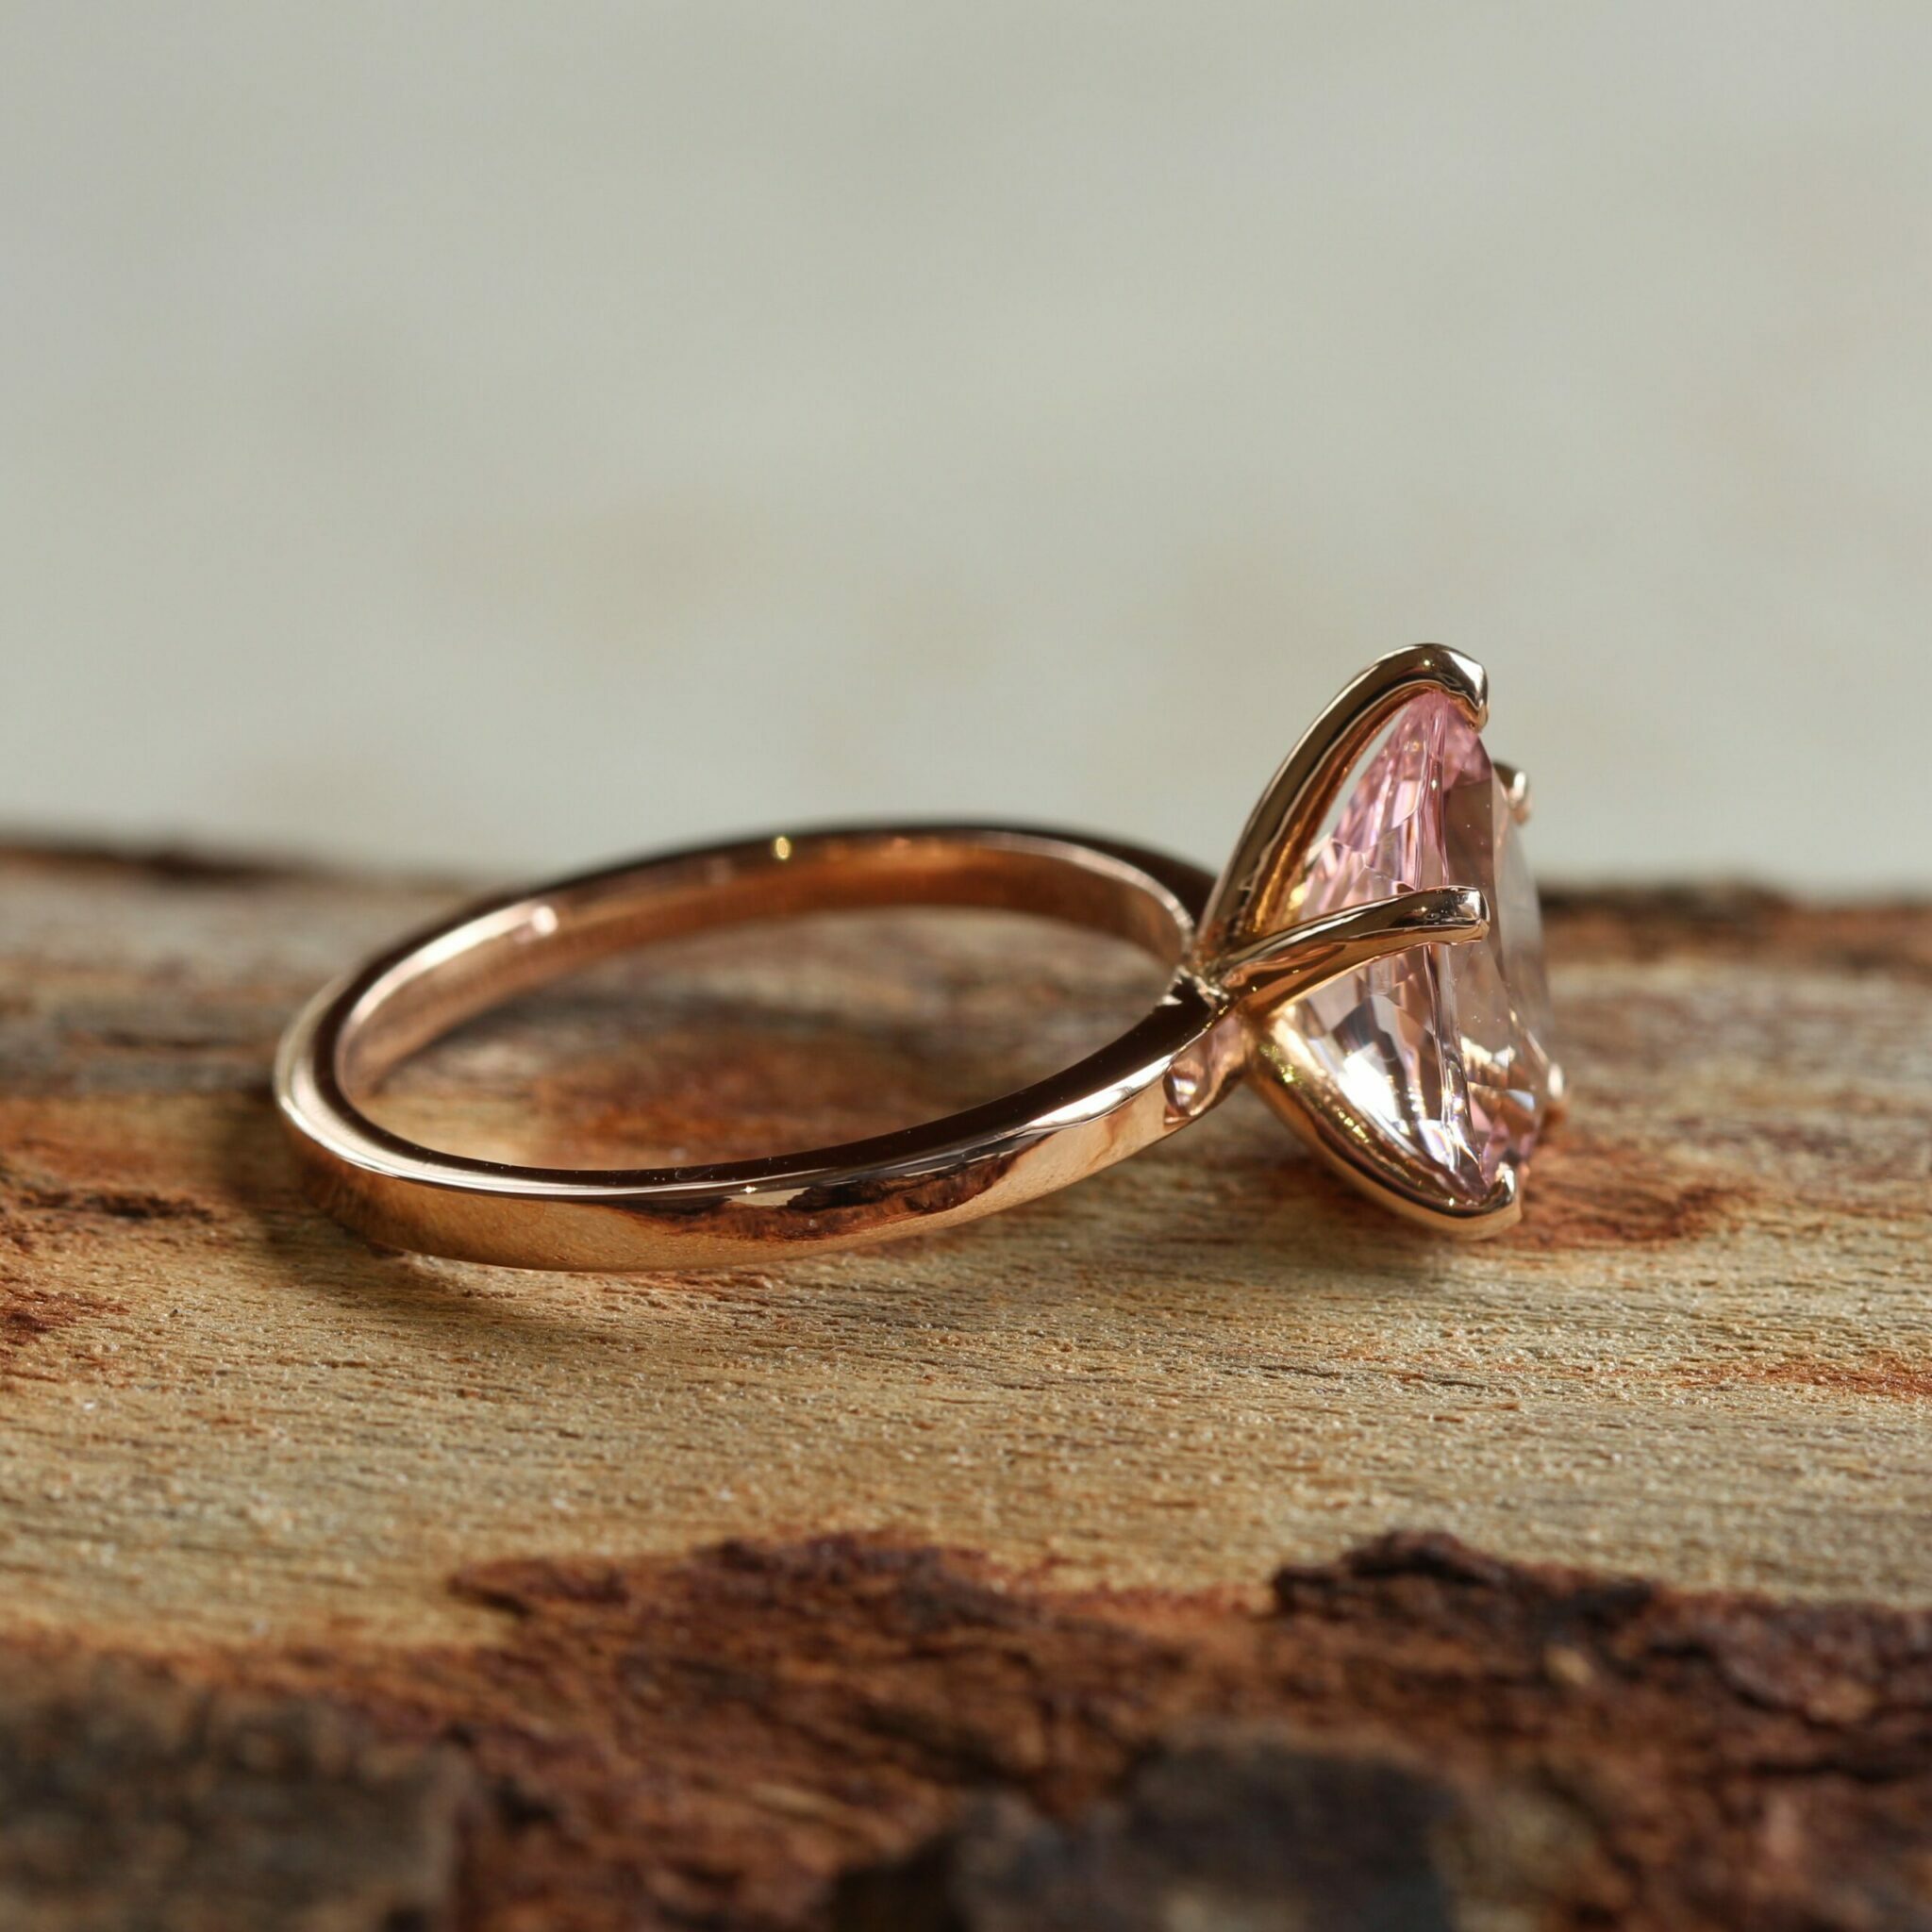 true-pink-morganite-solitaire-engagement-ring-12x8mm-pear-cut-six-prongs-14k-rose-gold-LS5951-side-wood